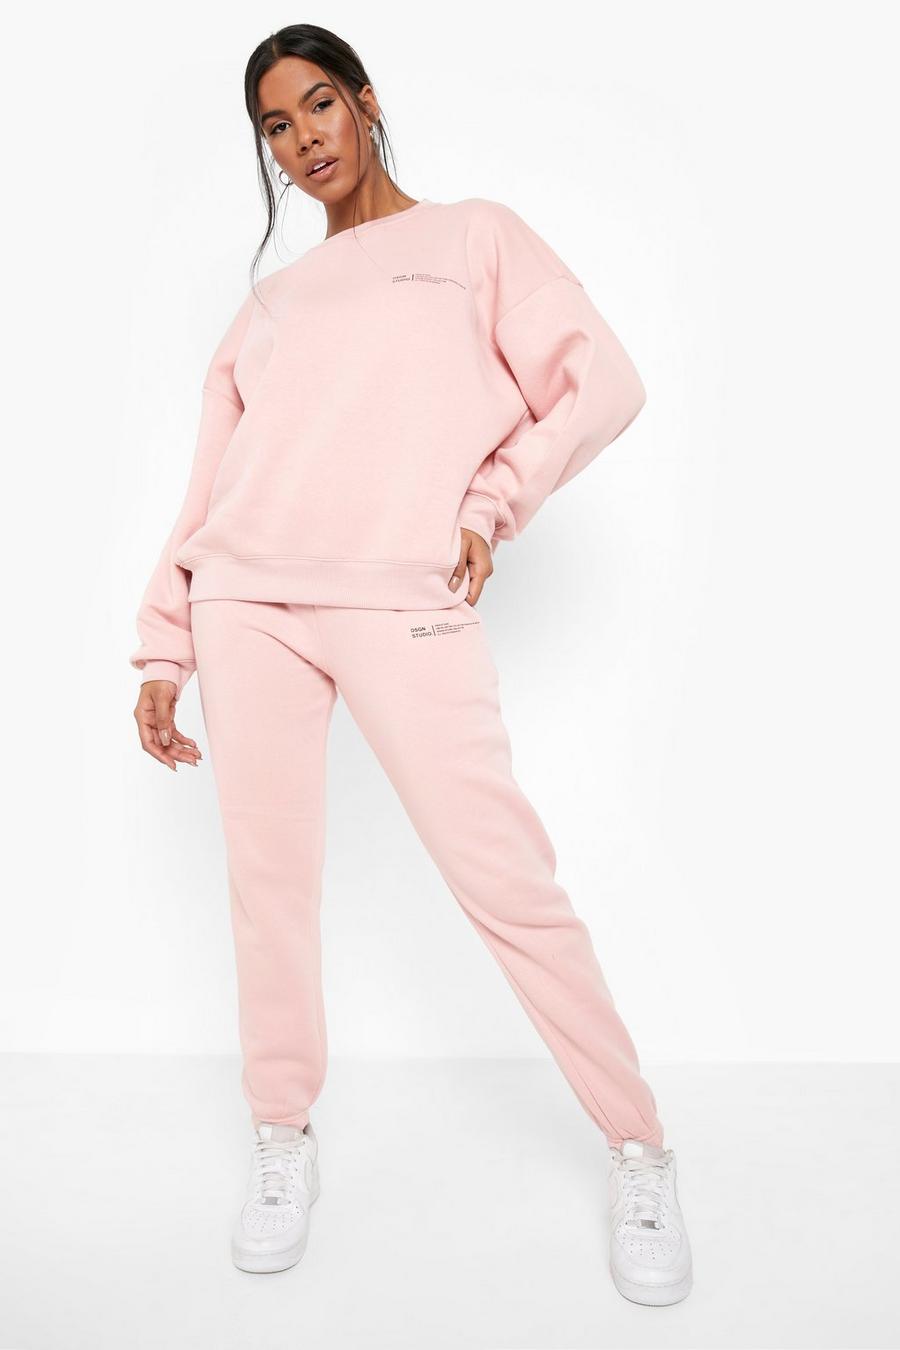 Dusky pink rosa Dsgn Text Printed Sweater Tracksuit